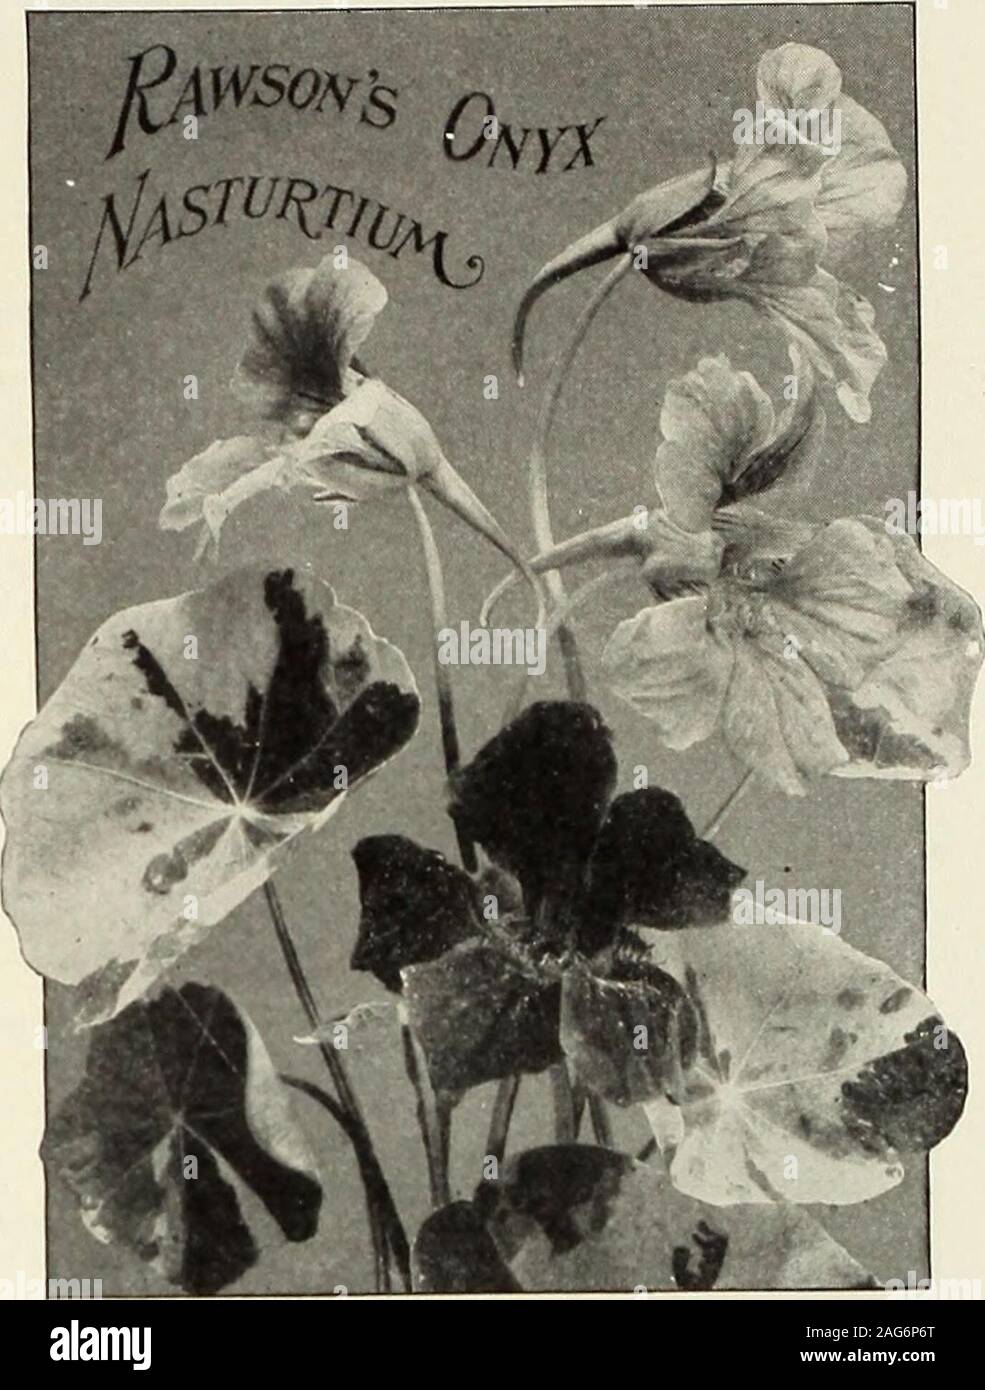 . Rawson's garden manual / W.W. Rawson & Co.. SEEDS. New Nasturtium, Rawsons Onyx, A distinct, new type, producing laisc llowers anda silver variegated foliage. The foliage is simplywonderful in its varifgation. No two leaves arealike. The accompanying illustration does not doit half justice. This must be seen to be appreci-ated. We offer :5296 Rawsons Tall Onyx Mixture. Pkt. i5cts., oz. 60 cts., 4 ozs. S2.5396 Rawsons Dwarf Onyx Mixture. Pkt. 15c., oz. 60 cts., 4 ozs.5475 NEMESIA LILACINA. New annual fromGernuui Southwest .Africa. Small snap-dragon-like tiowers; bushy growth; heiglit10 inches Stock Photo